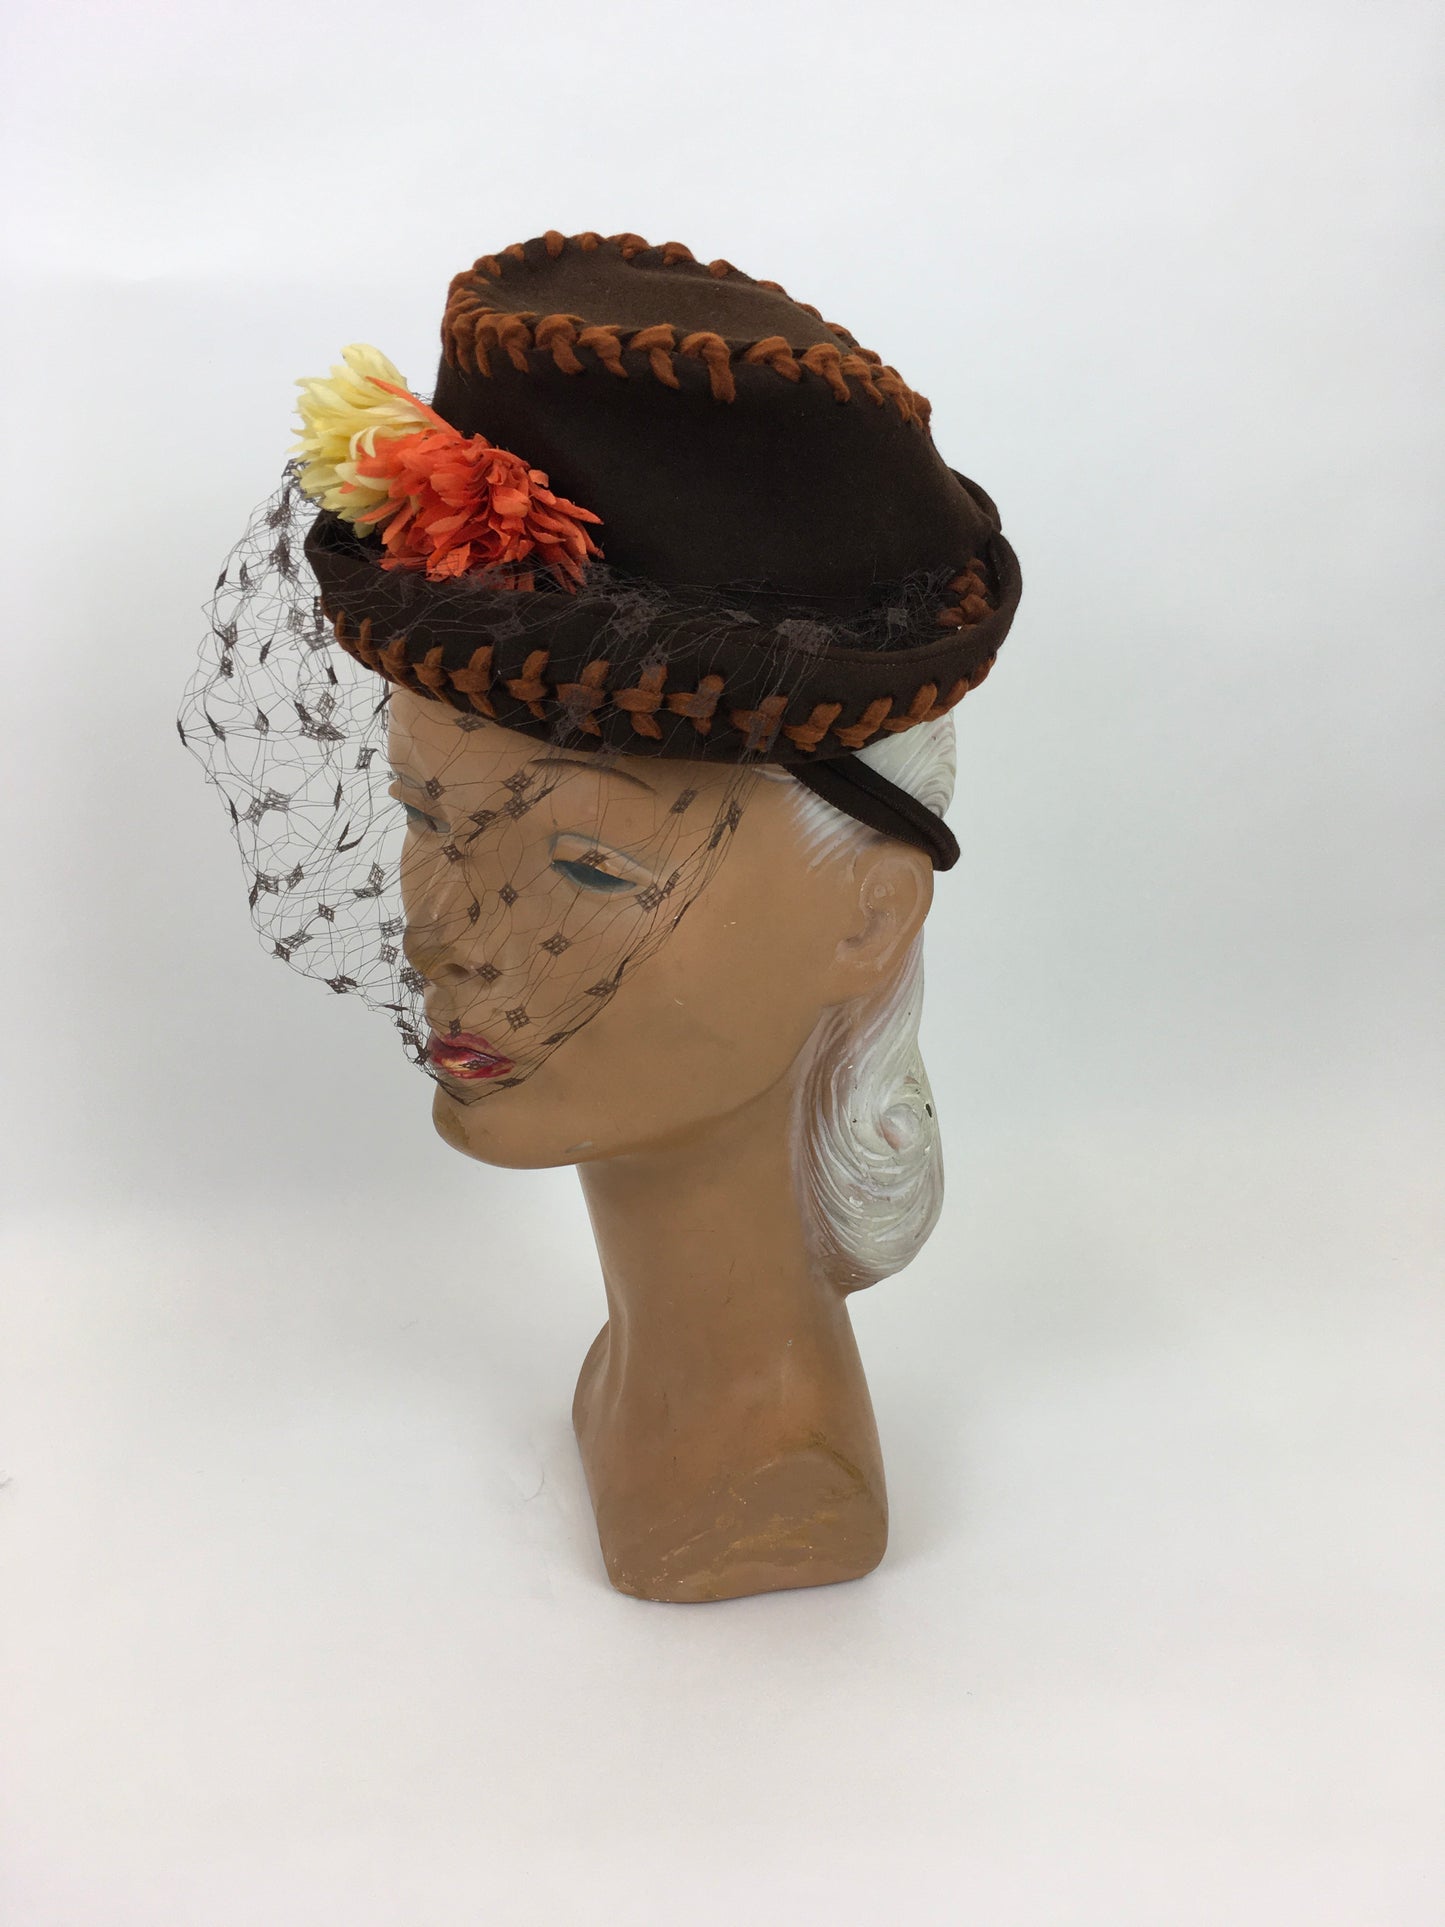 Original STUNNING 1940s American Topper Hat - In an Autumnal Colour Pallet of Warm Brown, Oranges and Yellow